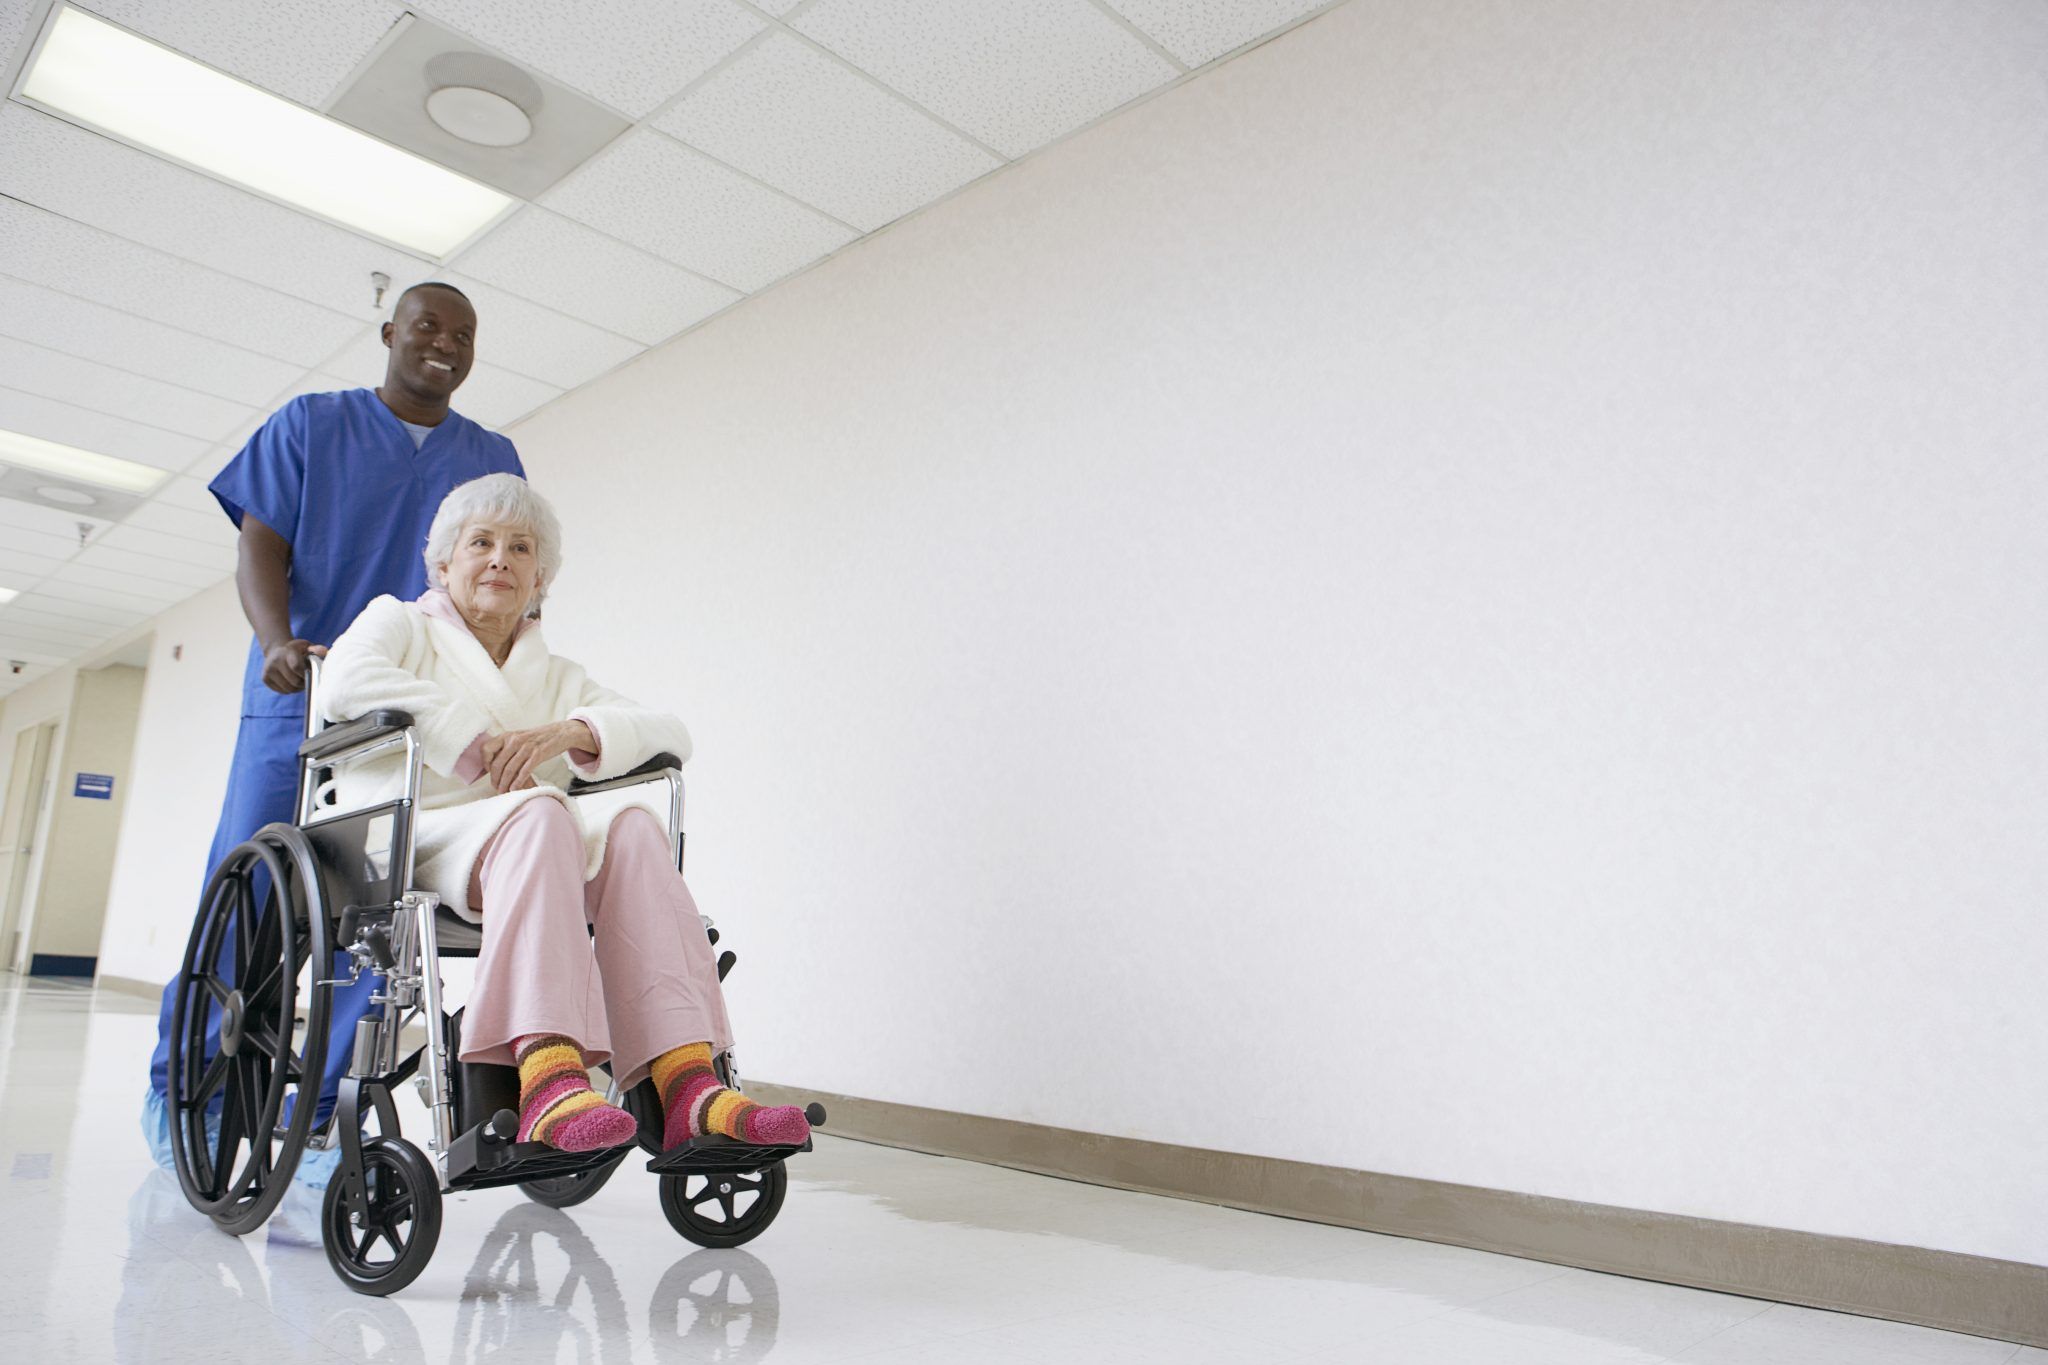 Nurse pushing patient in a wheelchair